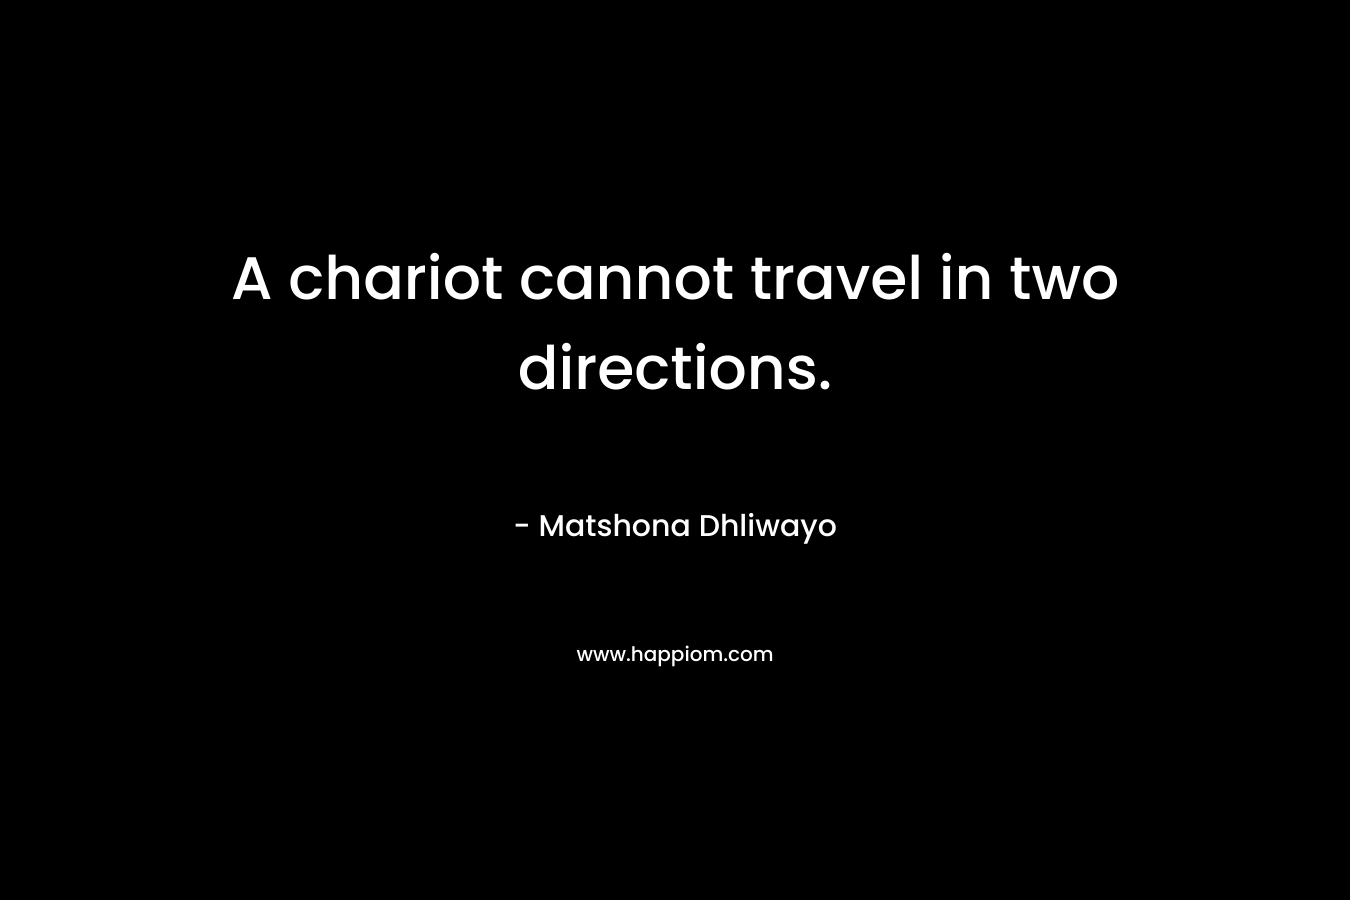 A chariot cannot travel in two directions.